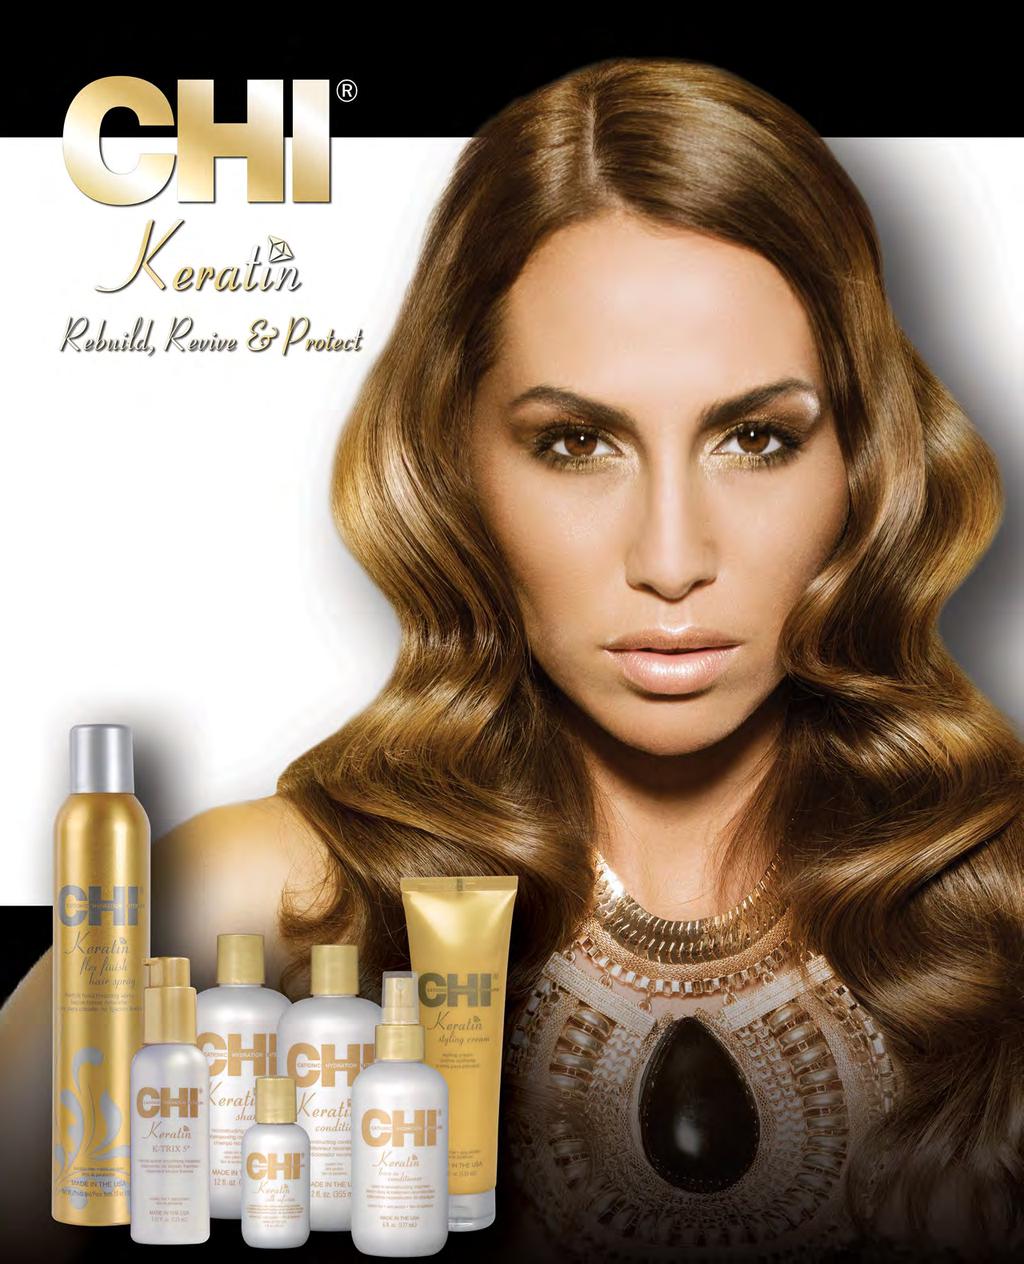 Transform chemically, mechanically or environmentally abused hair into strong, healthy, smooth locks with CHI Keratin.